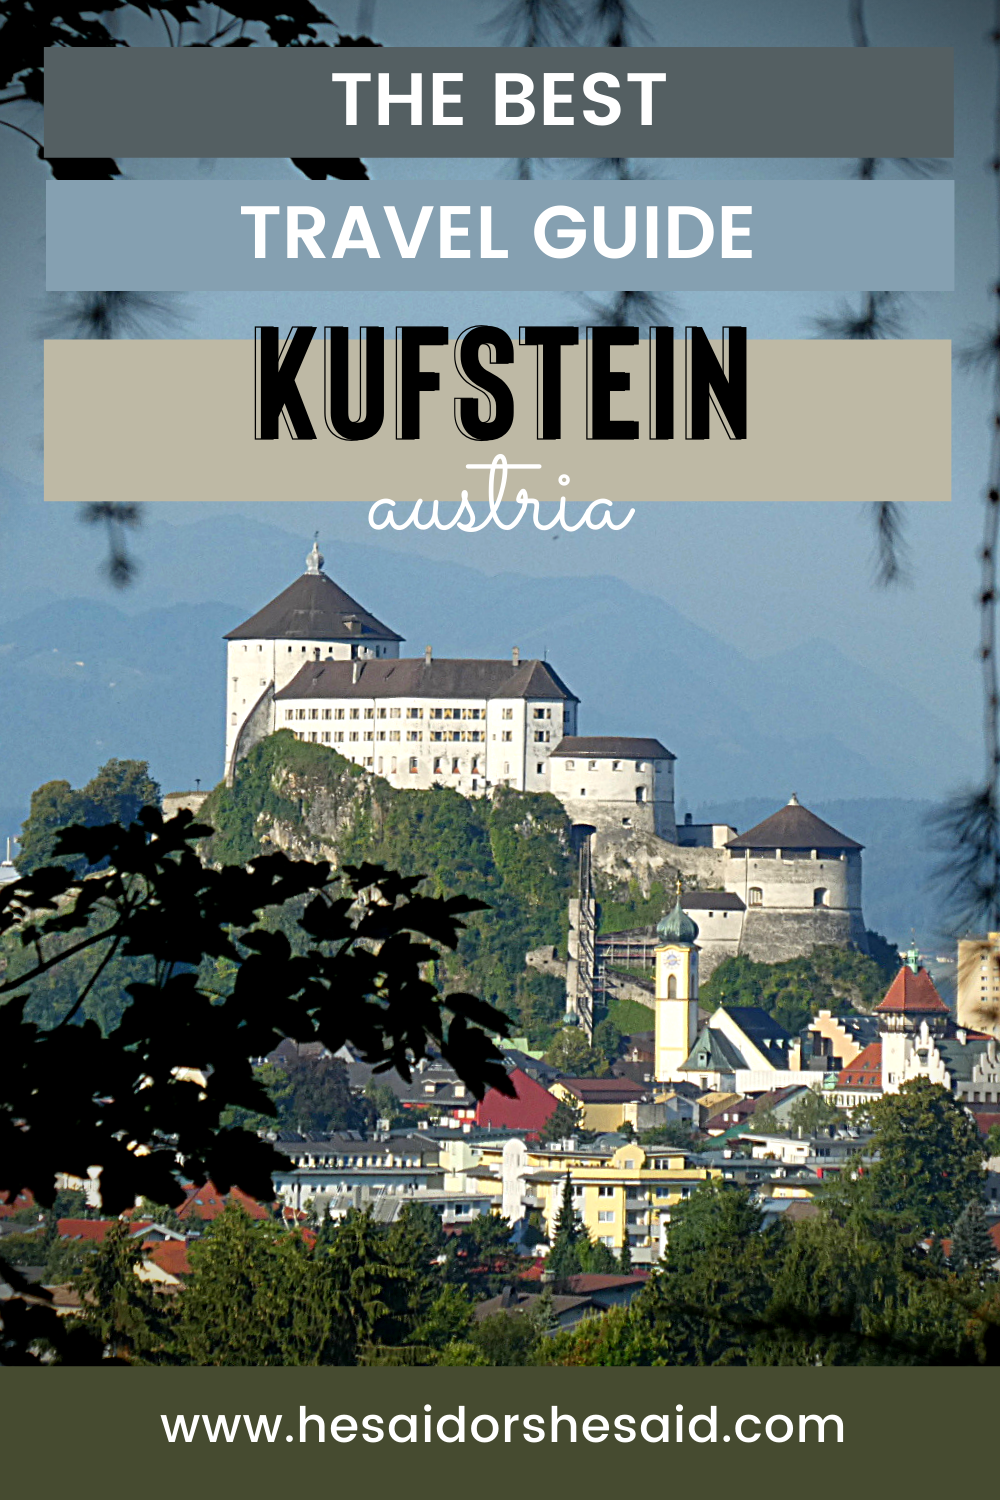 Best travel guide for Kufstein by hesaidorshesaid